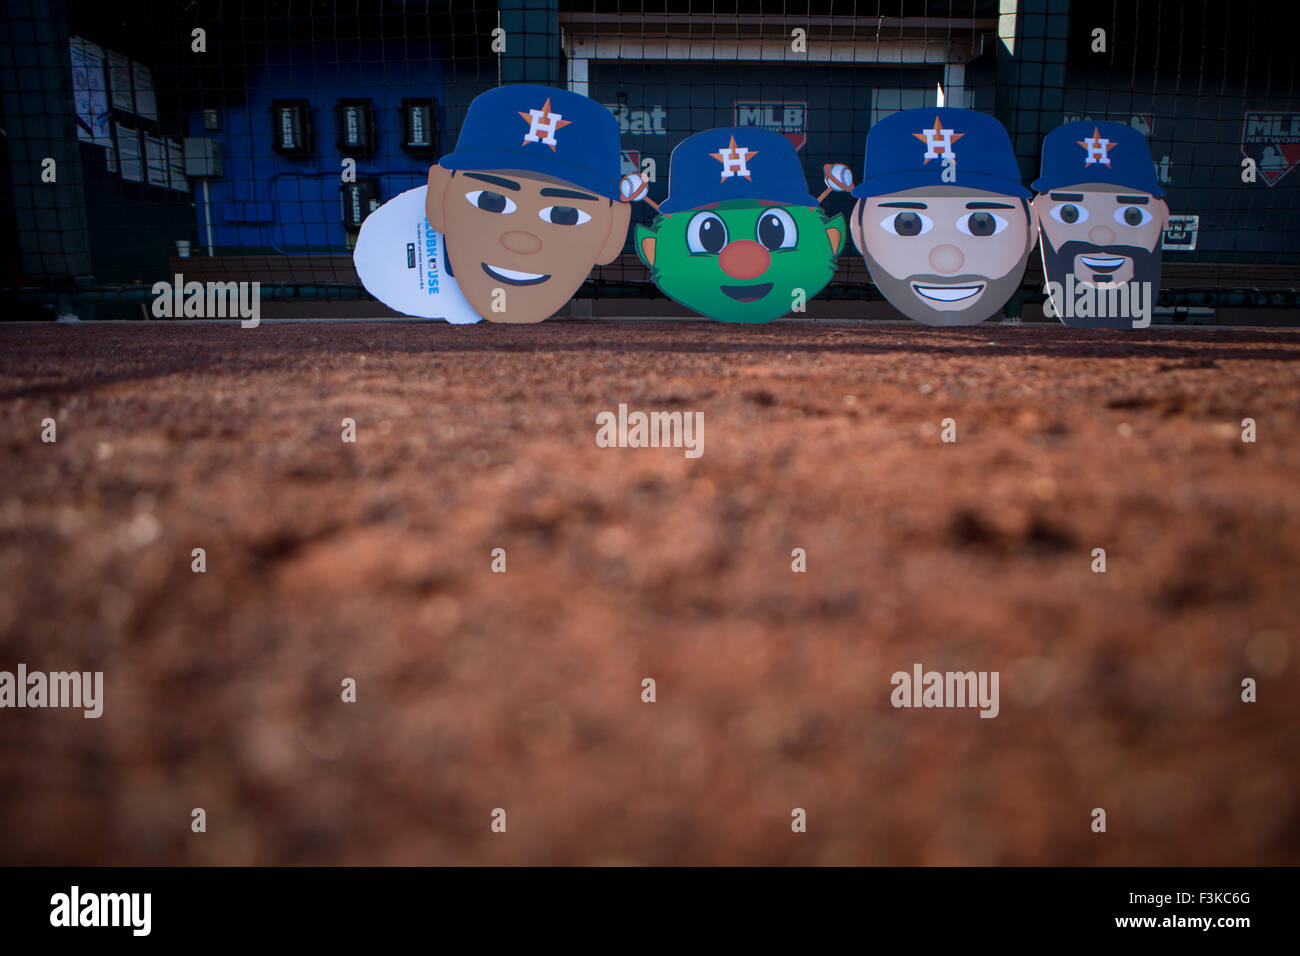 Kansas City, MO, USA. 08th Oct, 2015. Caricatures of players and mascots sit outside the Houston Astros dugout before Game 1 of the Divisional Series Playoff between the Houston Astros and the Kansas City Royals at Kauffman Stadium in Kansas City, MO. Kyle Rivas/CSM/Alamy Live News Stock Photo